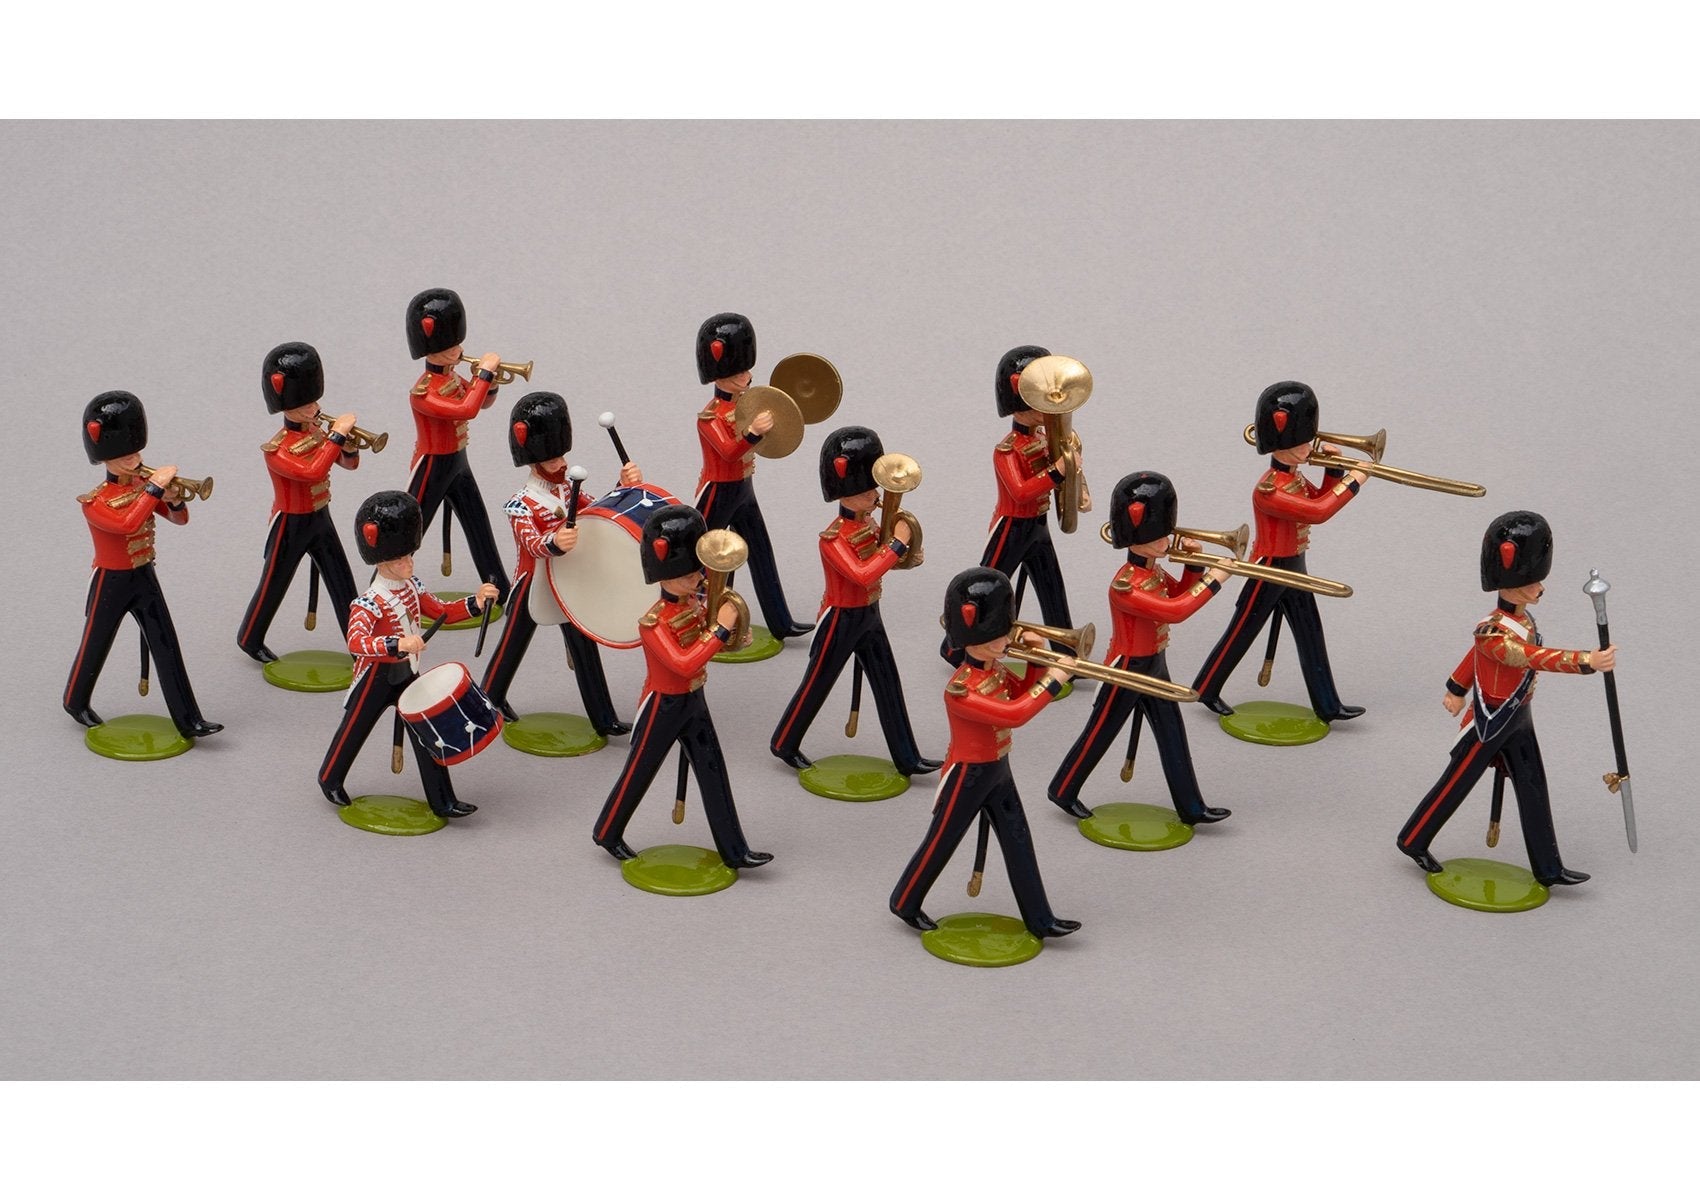 Set 99 Band of the Coldstream Guards 1854 | British Infantry | Crimean War | Combined set 99 and 99a, 13 Coldstream Guards bandsmen | Balaclava, Sevastapol, Alma | © Imperial Productions | Sculpt by David Cowe